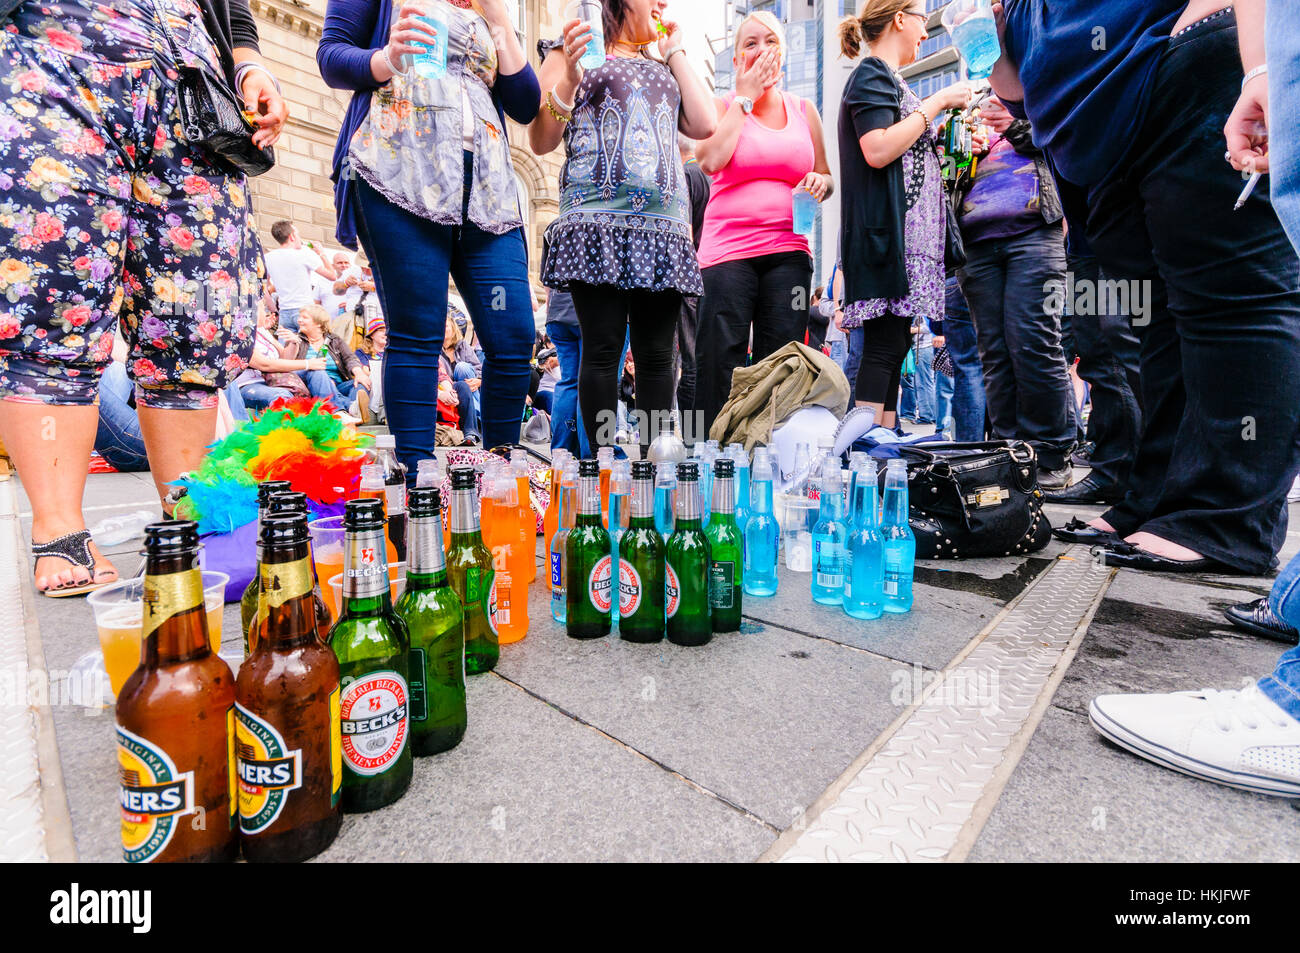 Large quantity of alcohol including Magners cider, Becks lager and WKD on the footpath with a crowd of people. Stock Photo